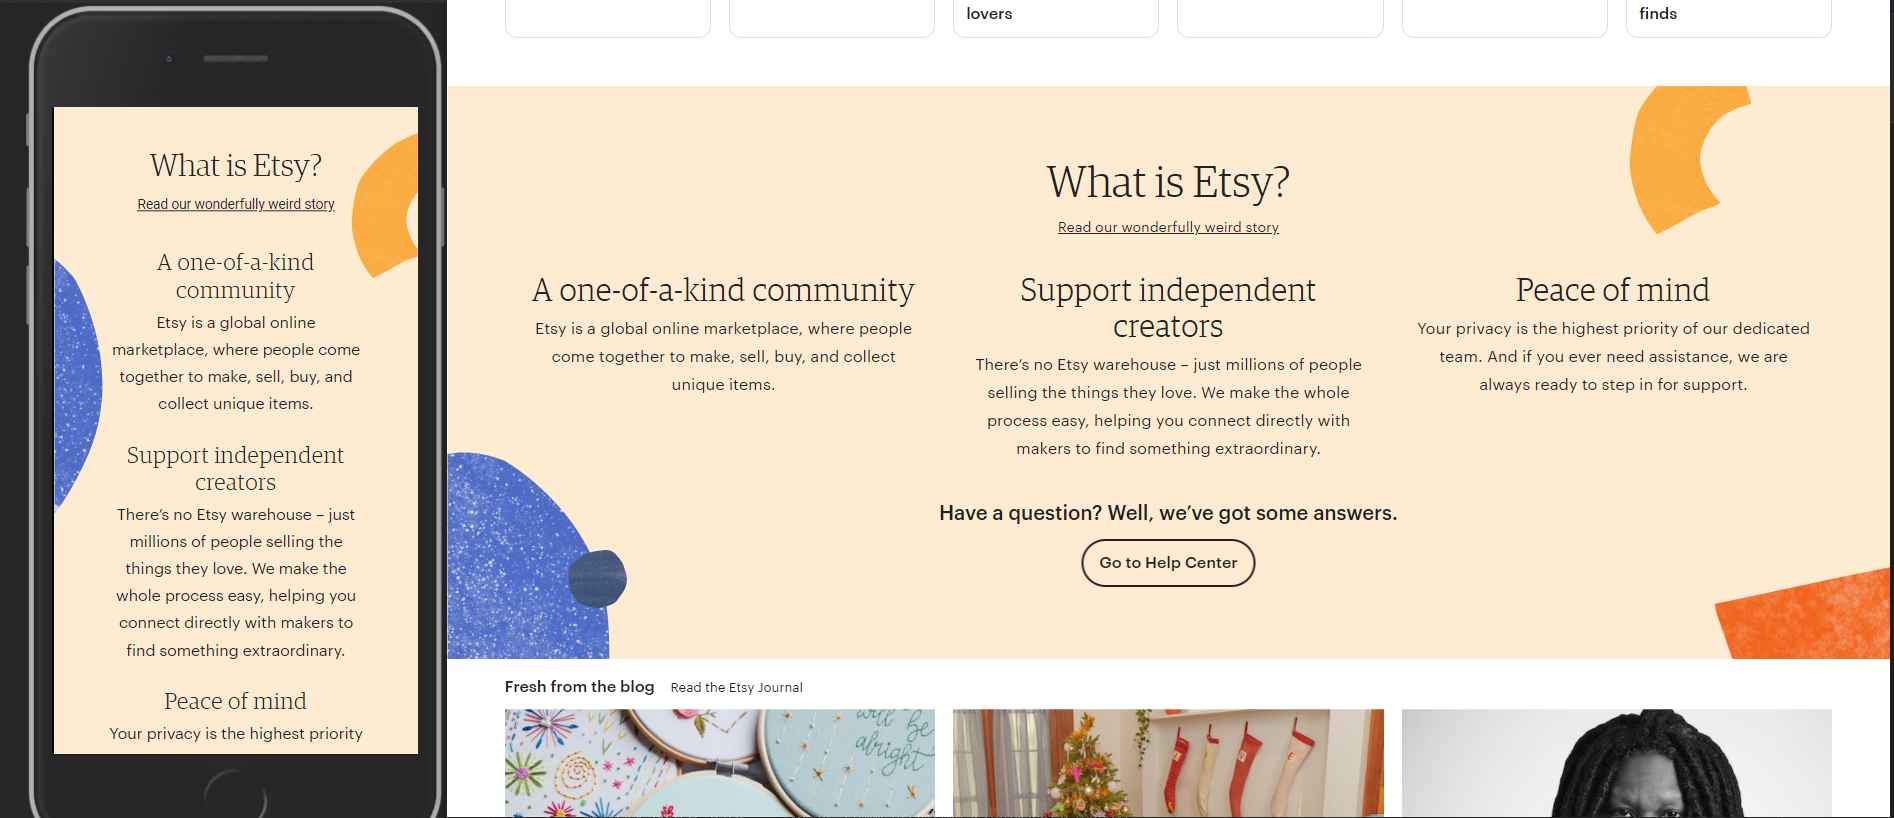 Etsy.com changes the layout on a mobile device to better display large text elements.